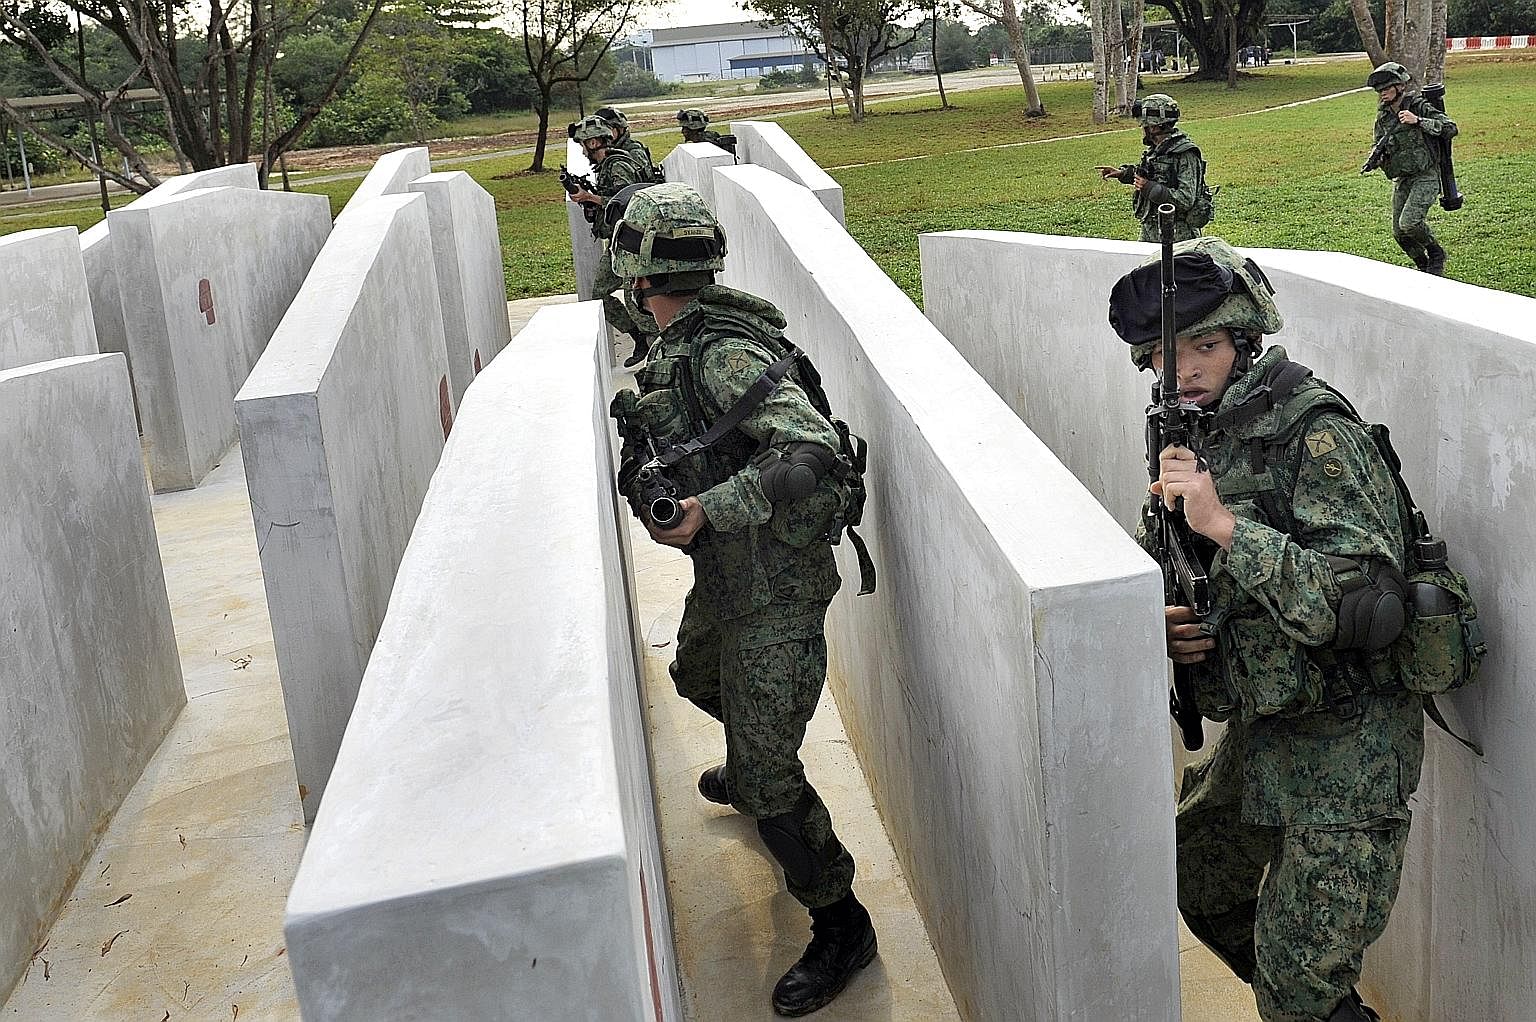 National servicemen during an obstacle-course training session. They will soon be trained in cyber-security tactics as well.